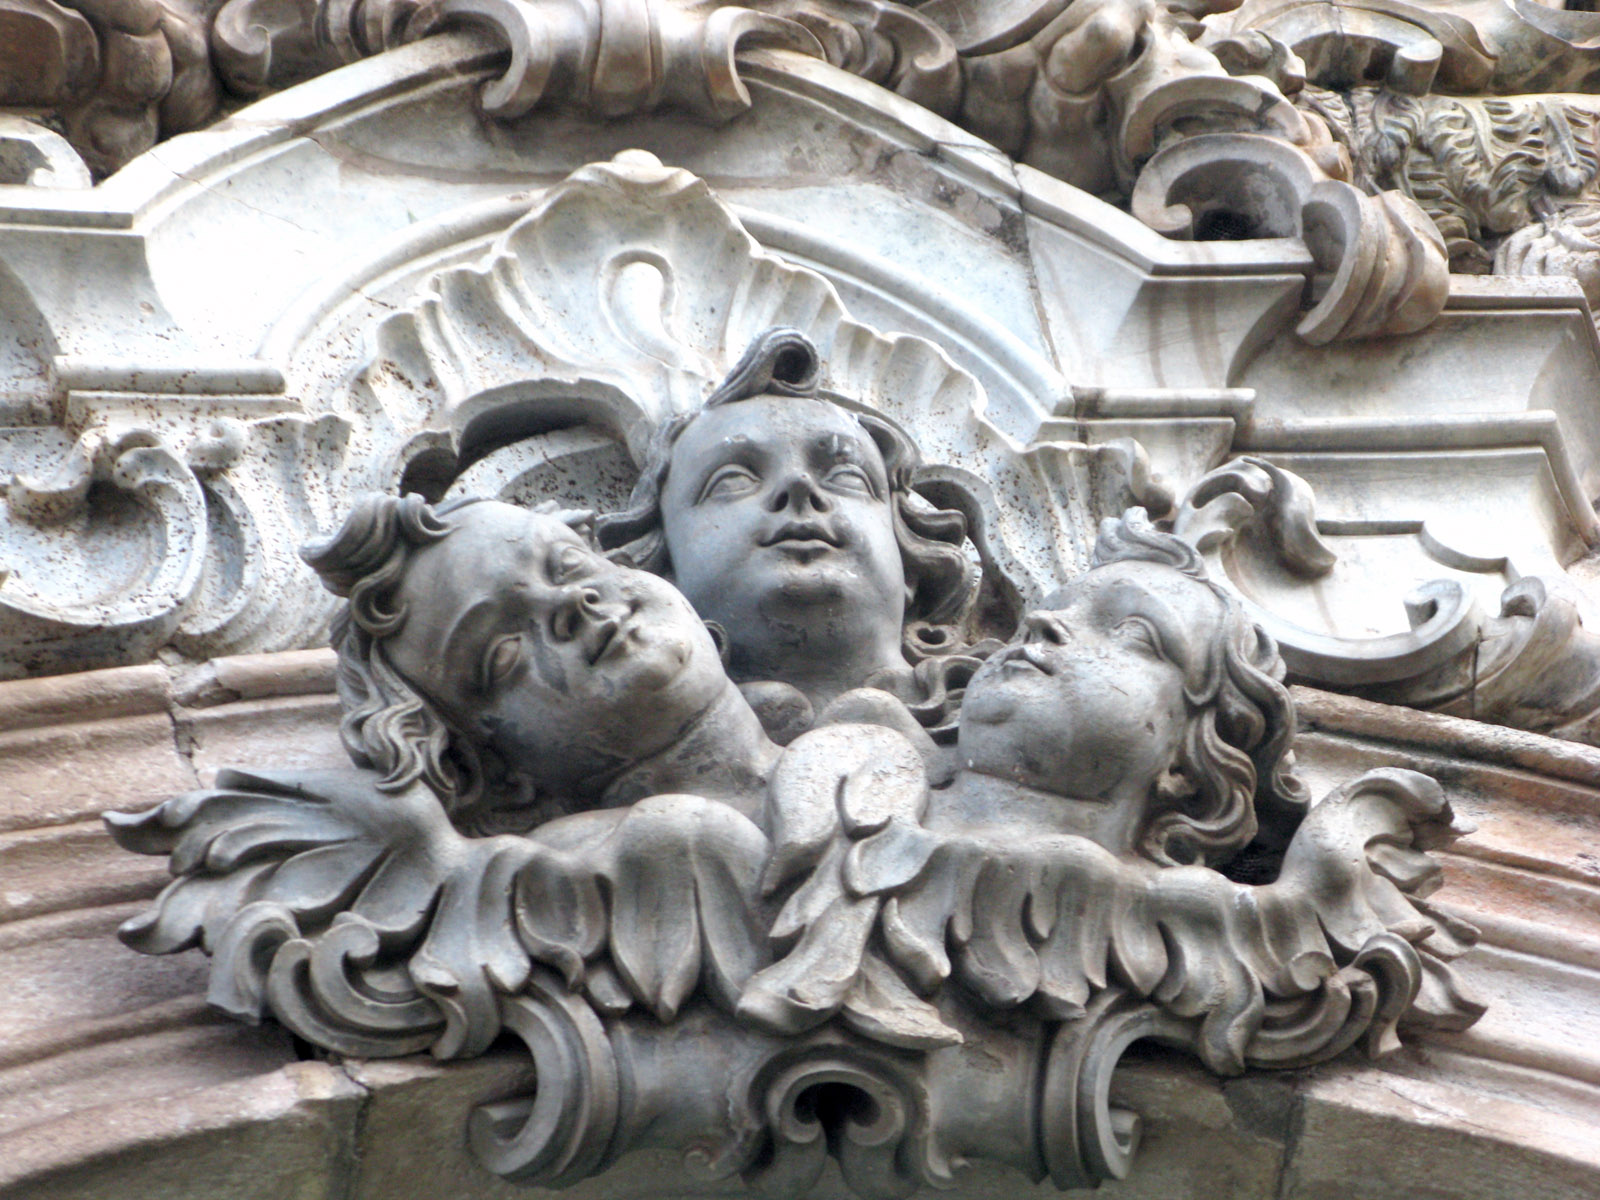 this ornate wall sculpture depicts three s'heads and features architectural elements